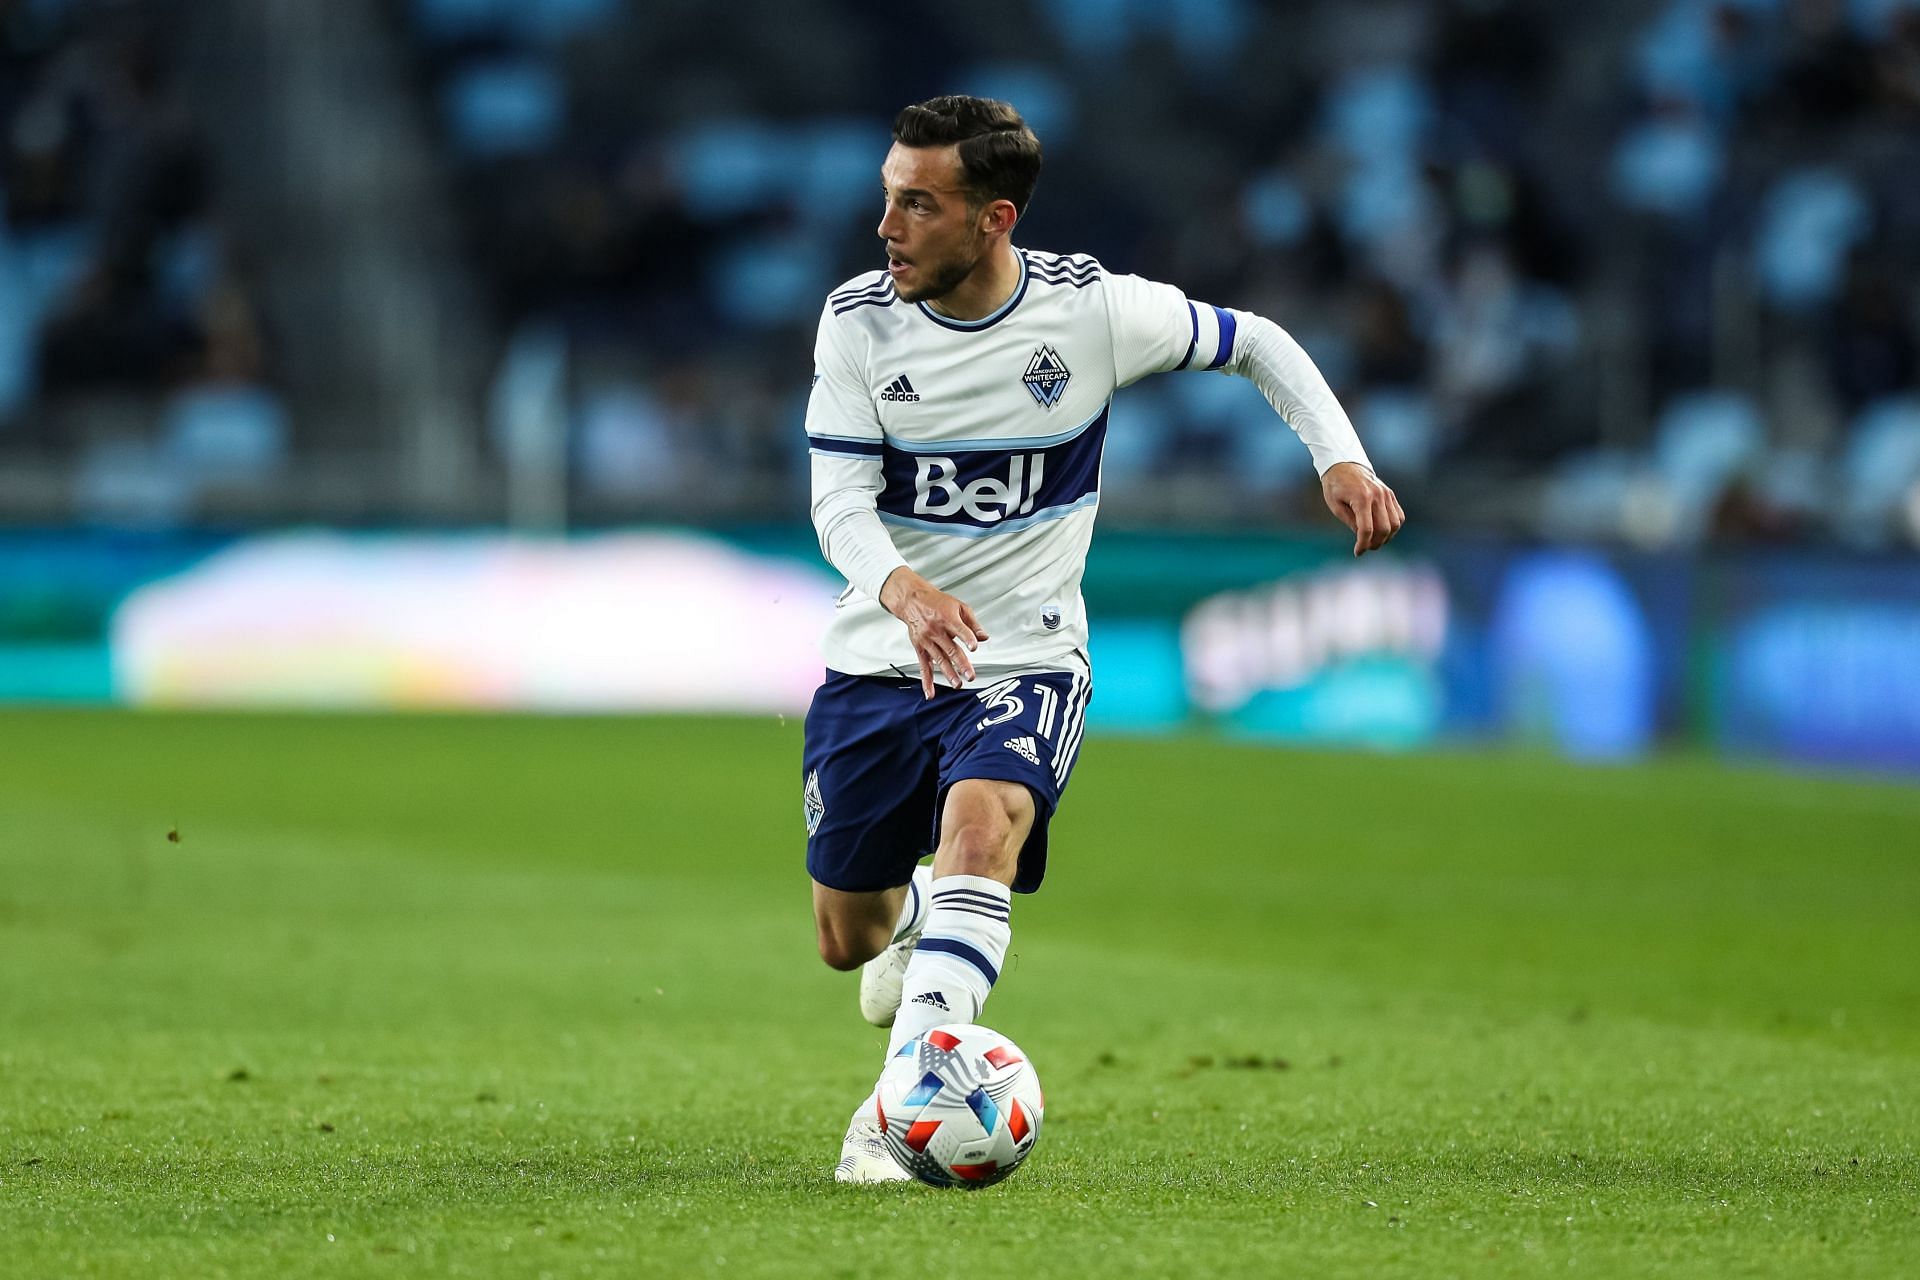 Vancouver Whitecaps FC will face San Diego Loyal in a friendly fixture on Saturday